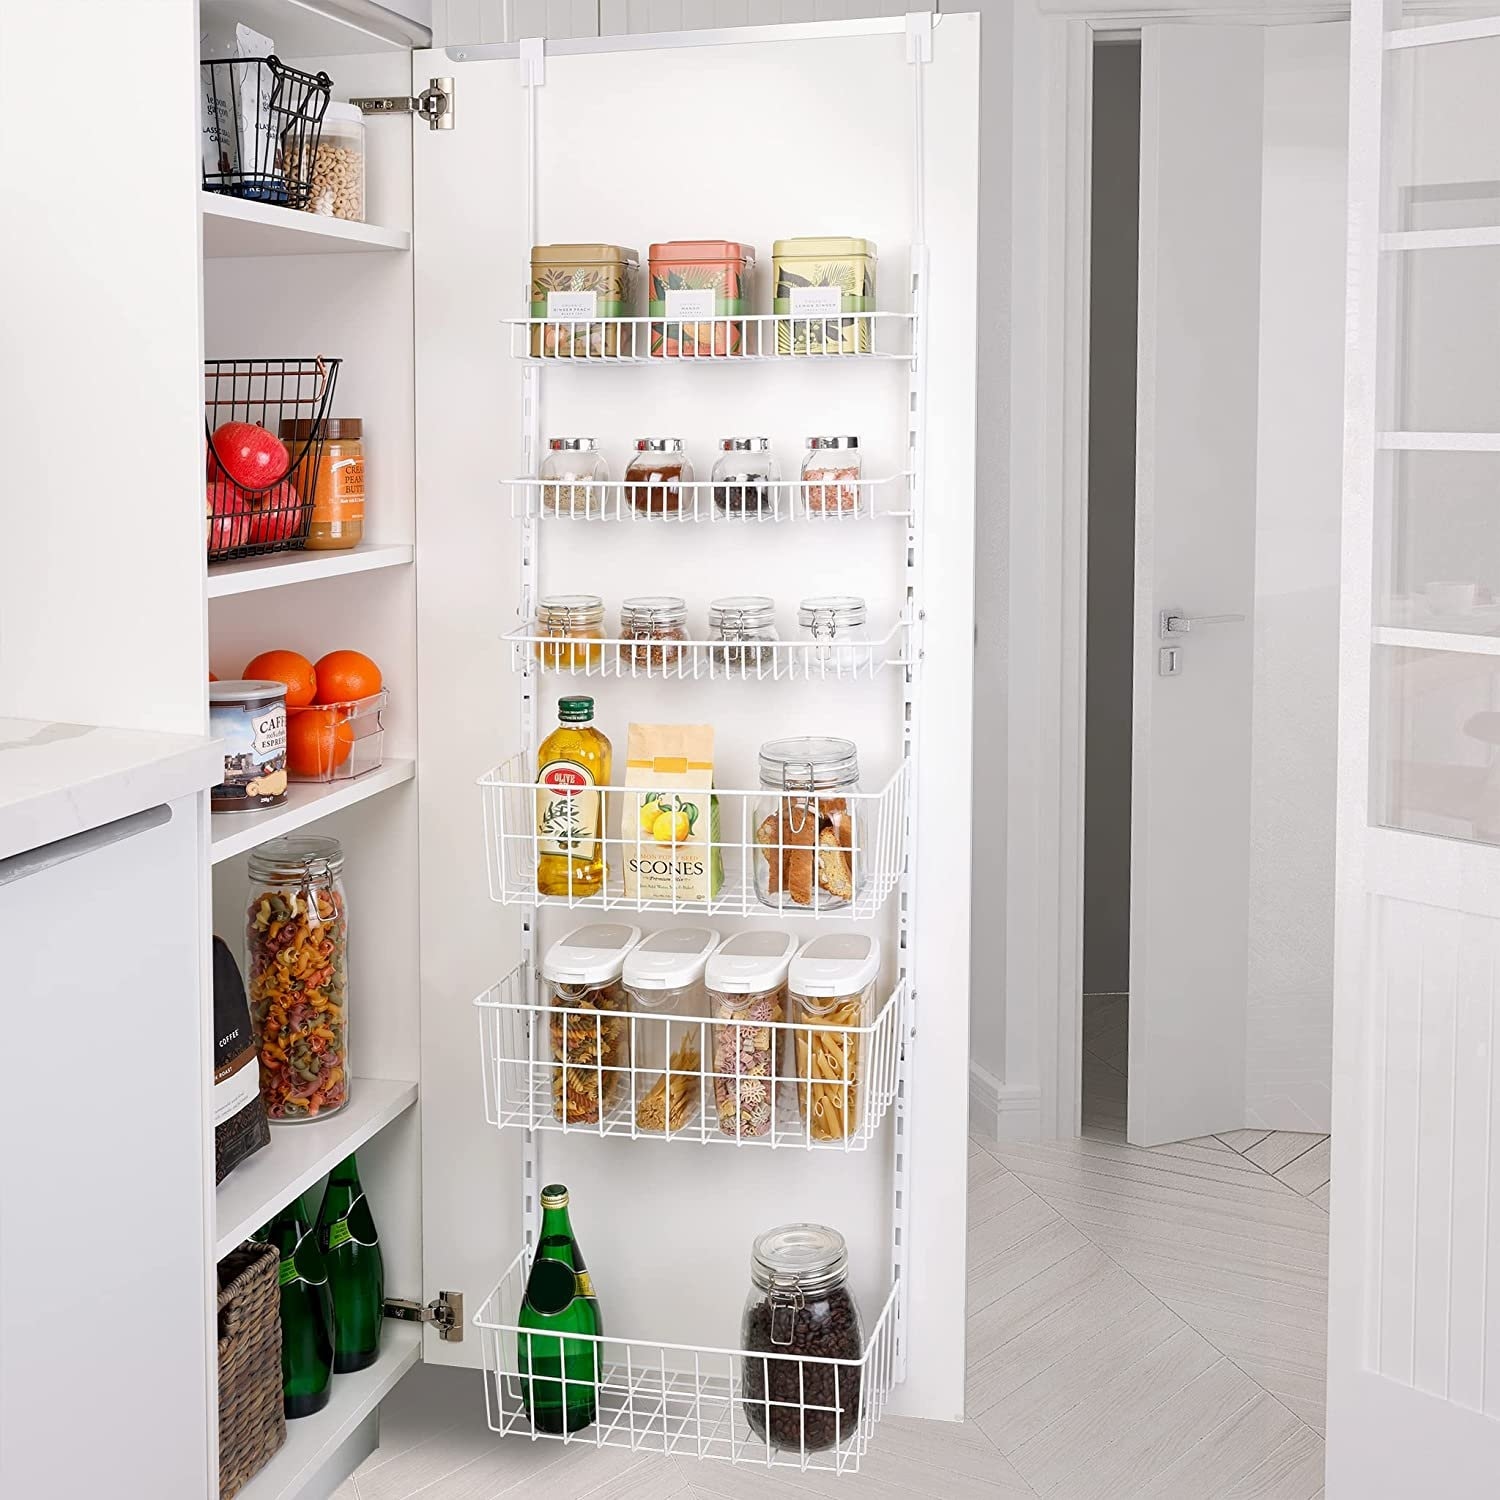 https://ak1.ostkcdn.com/images/products/is/images/direct/2a07e8b88457ac11574a22b8f87a35bf53919671/Over-the-Door-Pantry-Organizer-Rack-with-6-Adjustable-Steel-Shelves-%2C-White.jpg